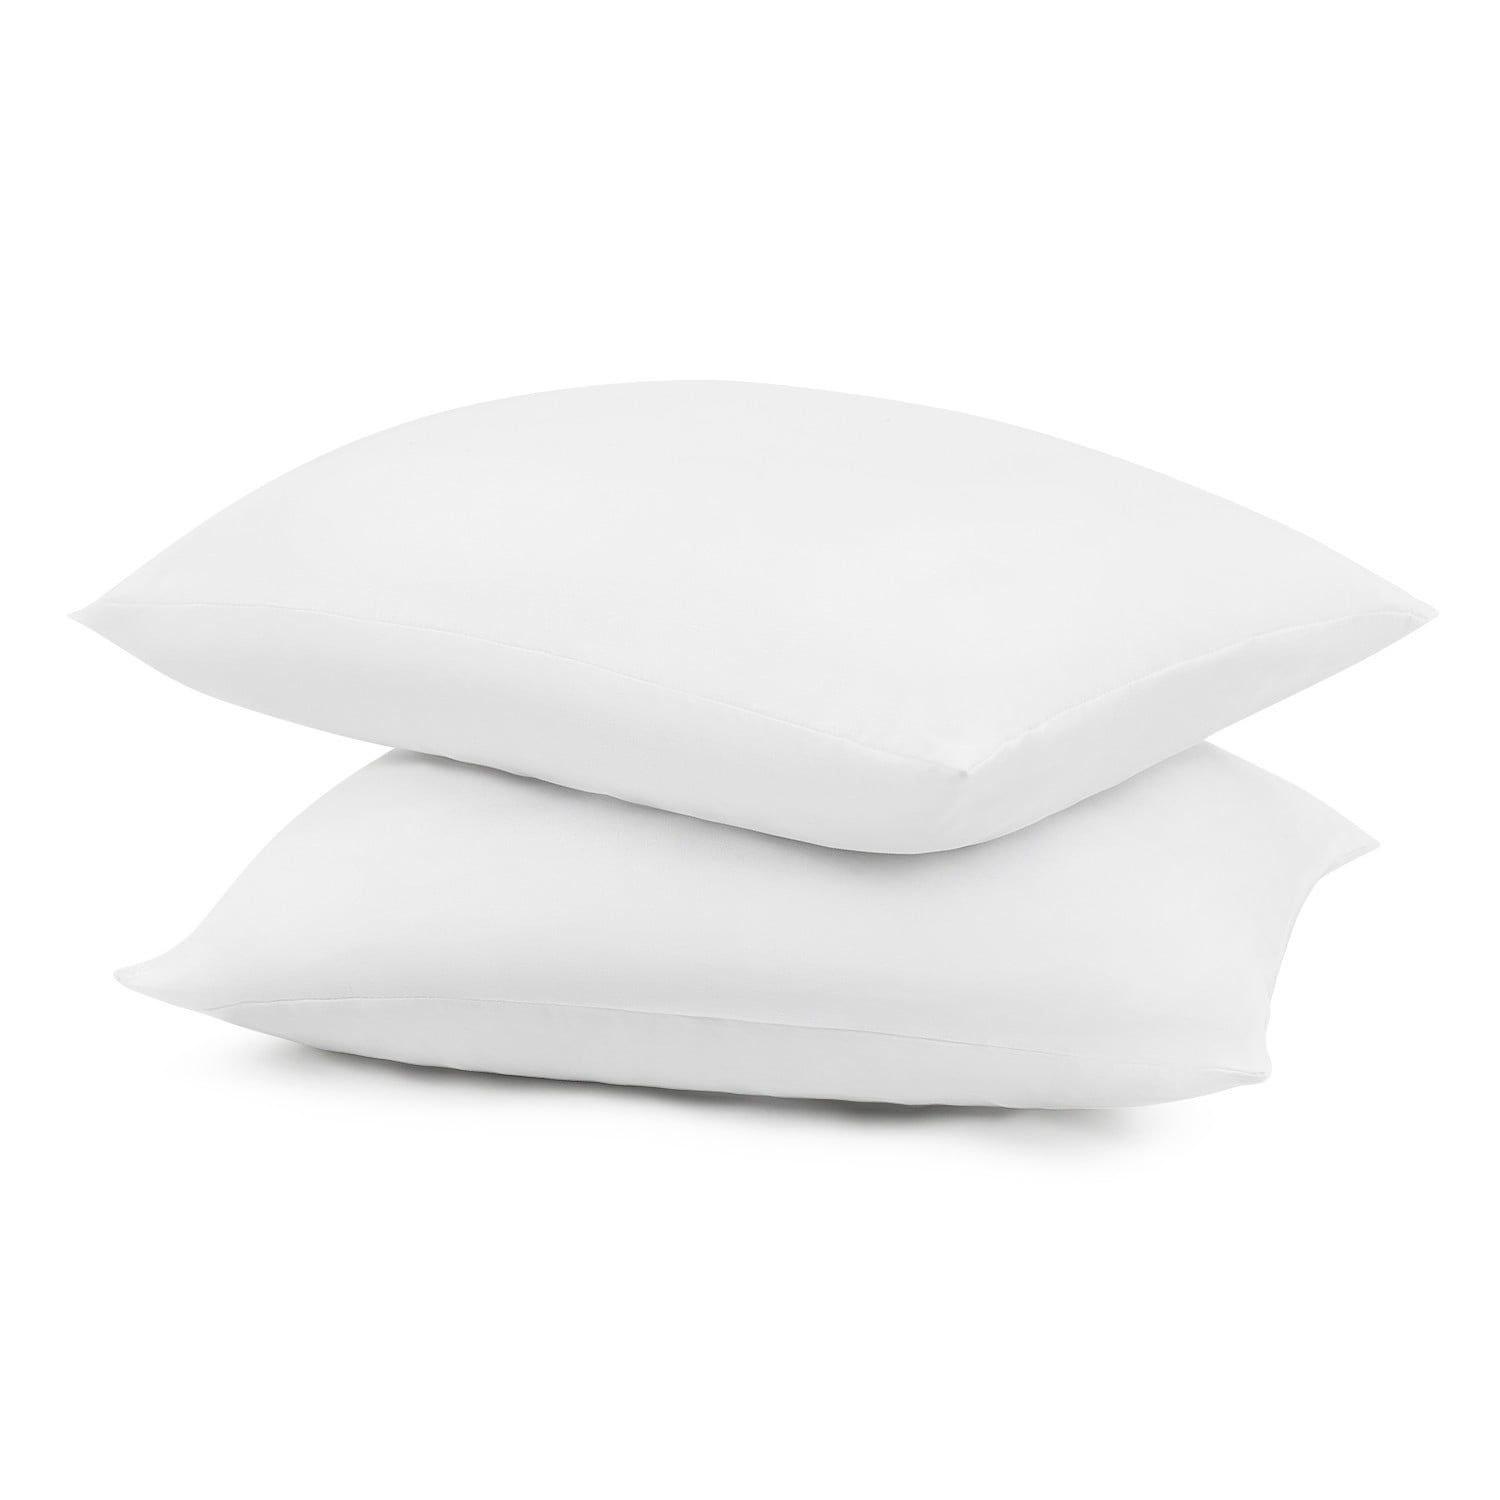 Pure Down Duck Feather 18 in. x 18 in. Pillow Insert (Set of 2)  PD-PI-15002-B - The Home Depot